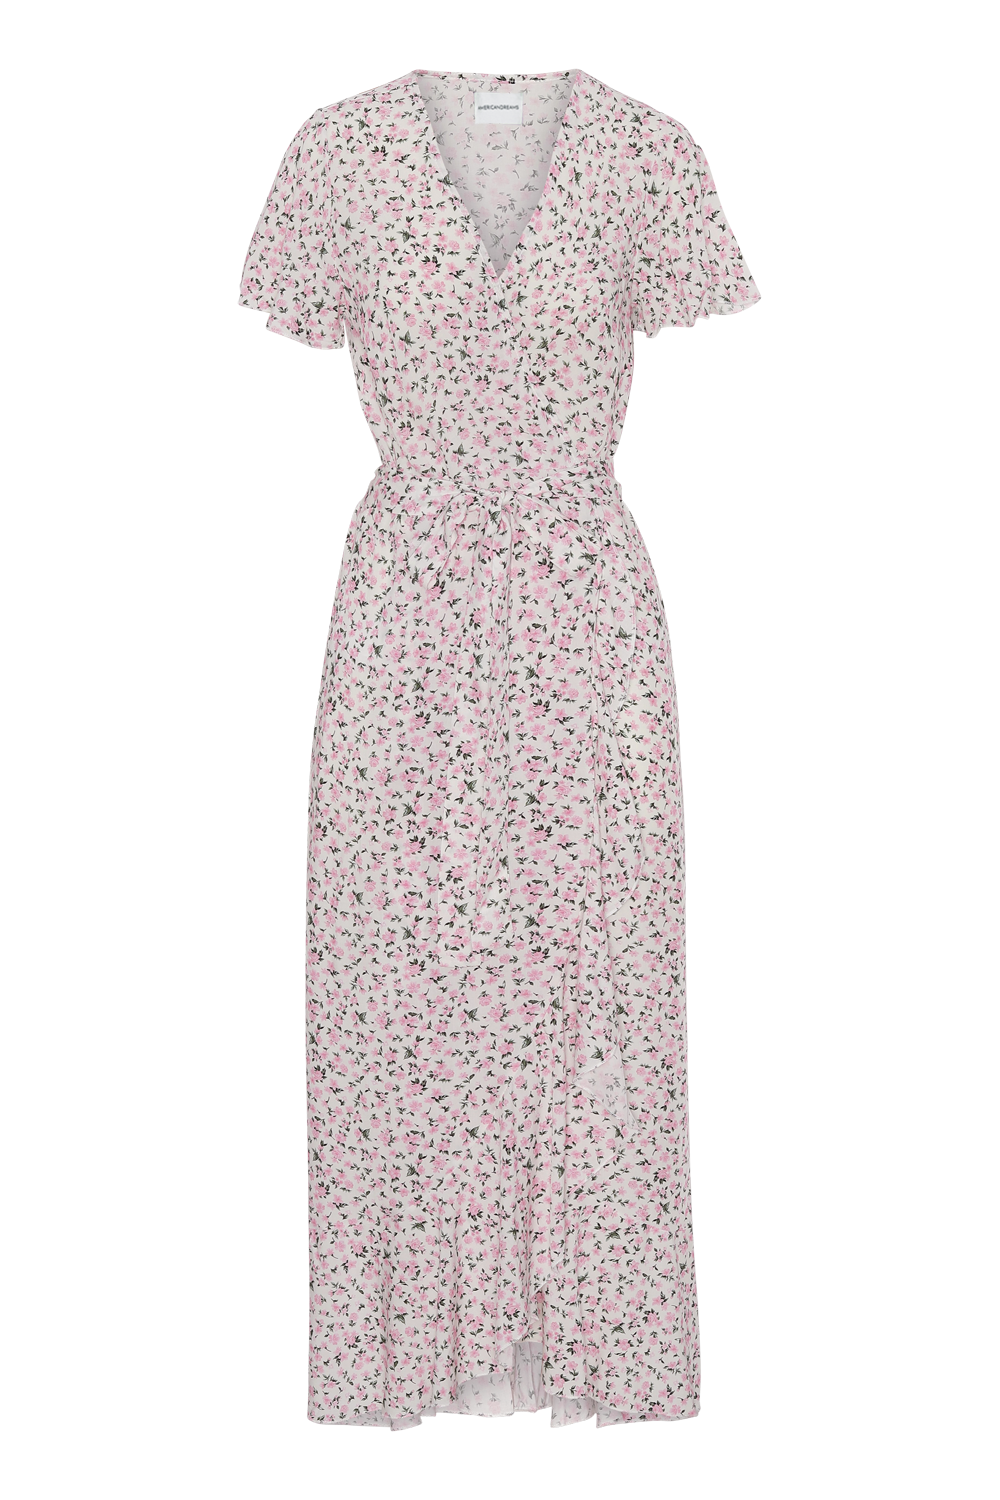 Milly Wrap Dress Long White / Pink Flower